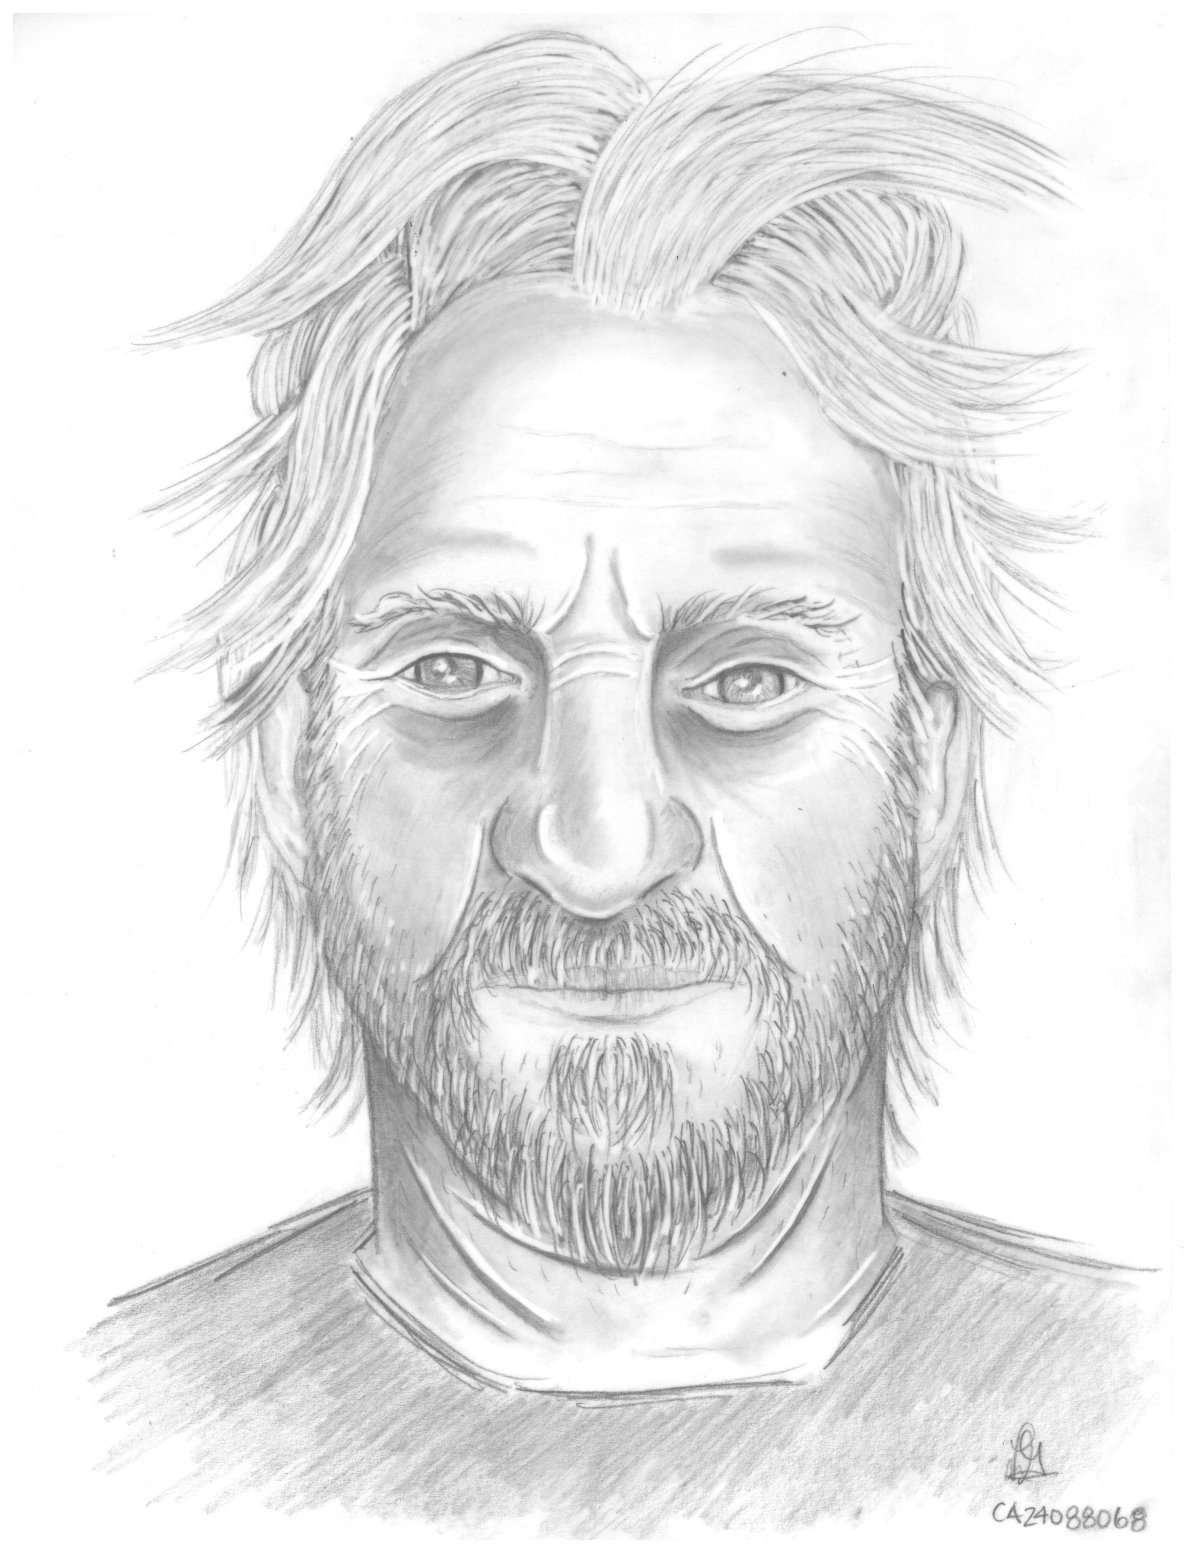 Calgary police have released a composite sketch of a man who was found dead near the Bow River in March.